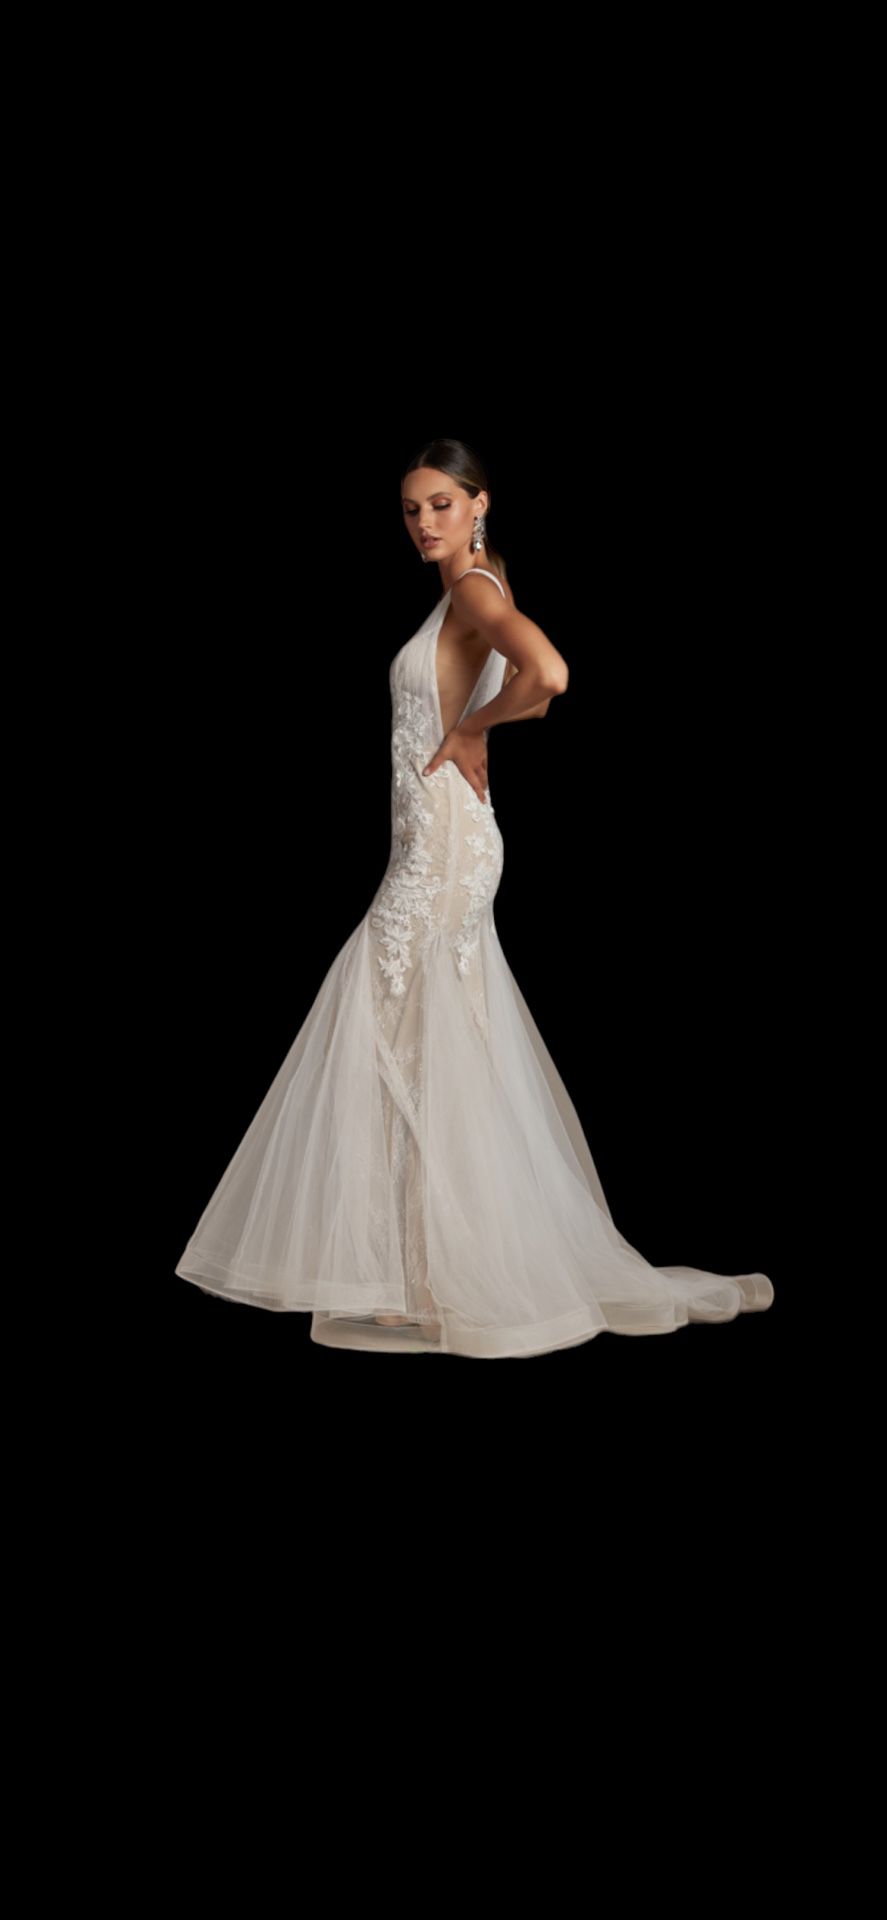 New With Tags Wedding Gown & Wedding Dress $385